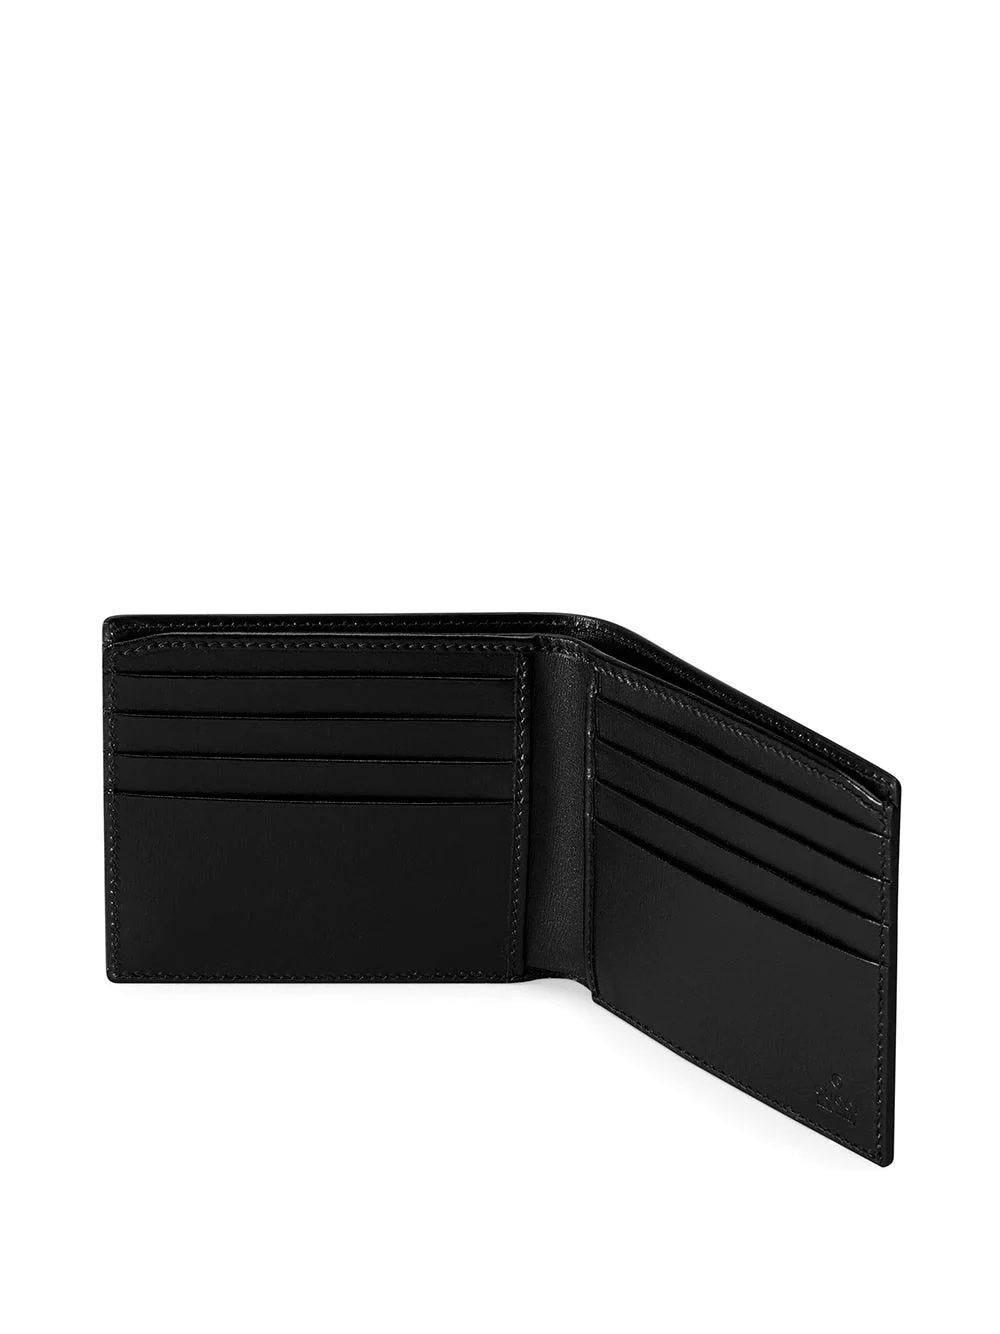 GG Marmont bi-fold wallet in leather